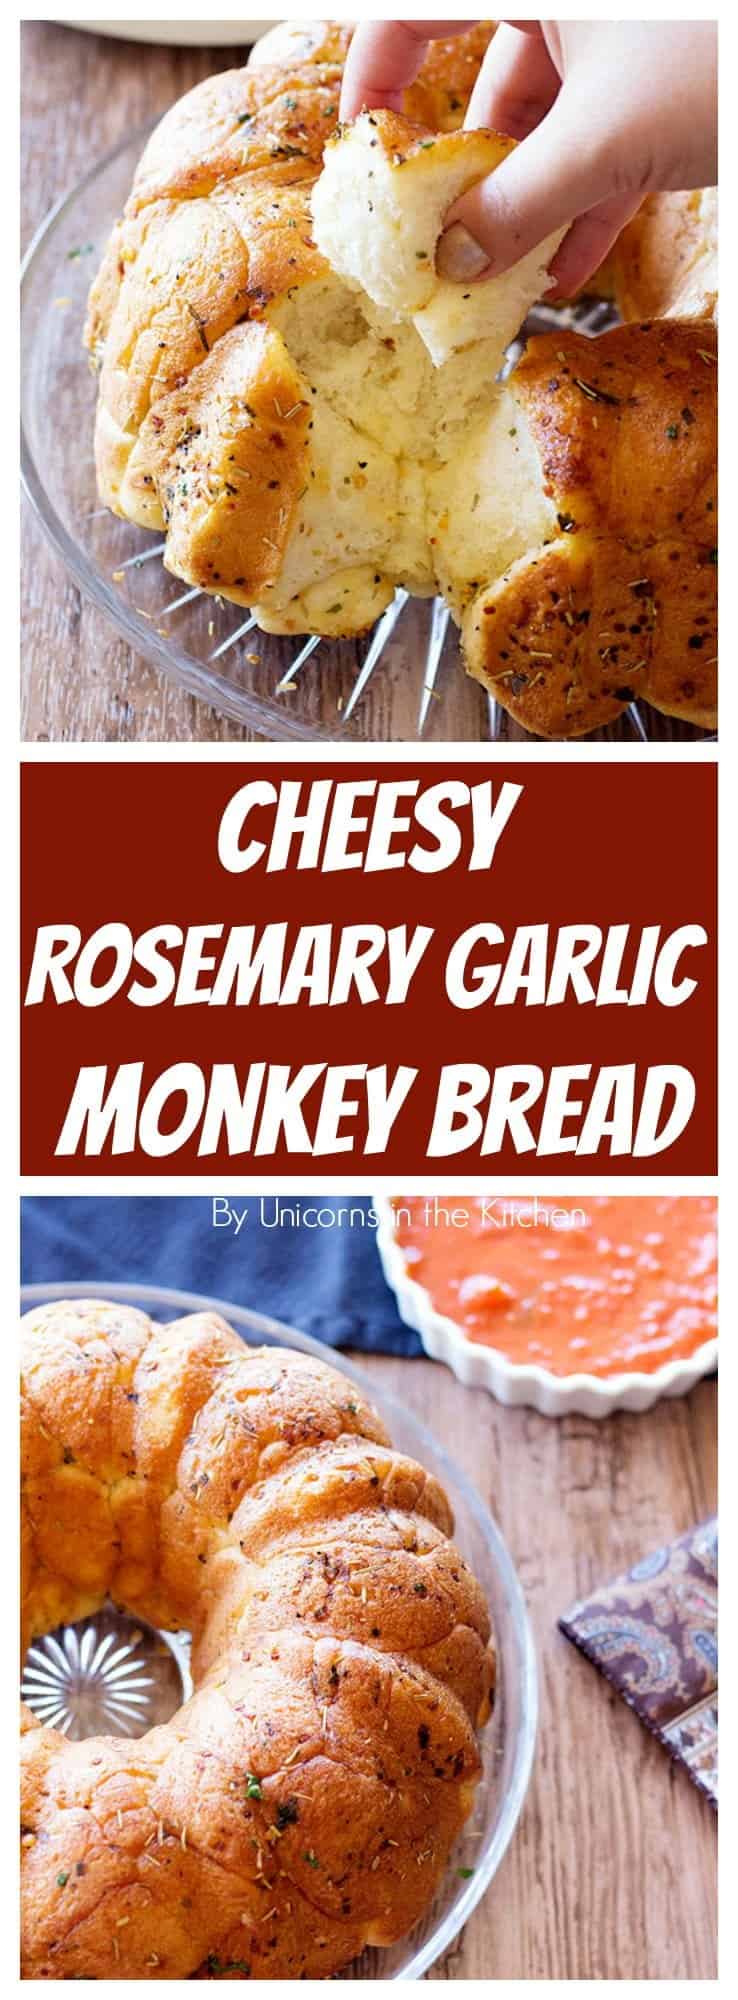 This cheesy rosemary garlic monkey bread is so easy to make, you will want to make it everyday! Serve it with a delicious marinara sauce to enjoy all the good flavors to their fullest! 